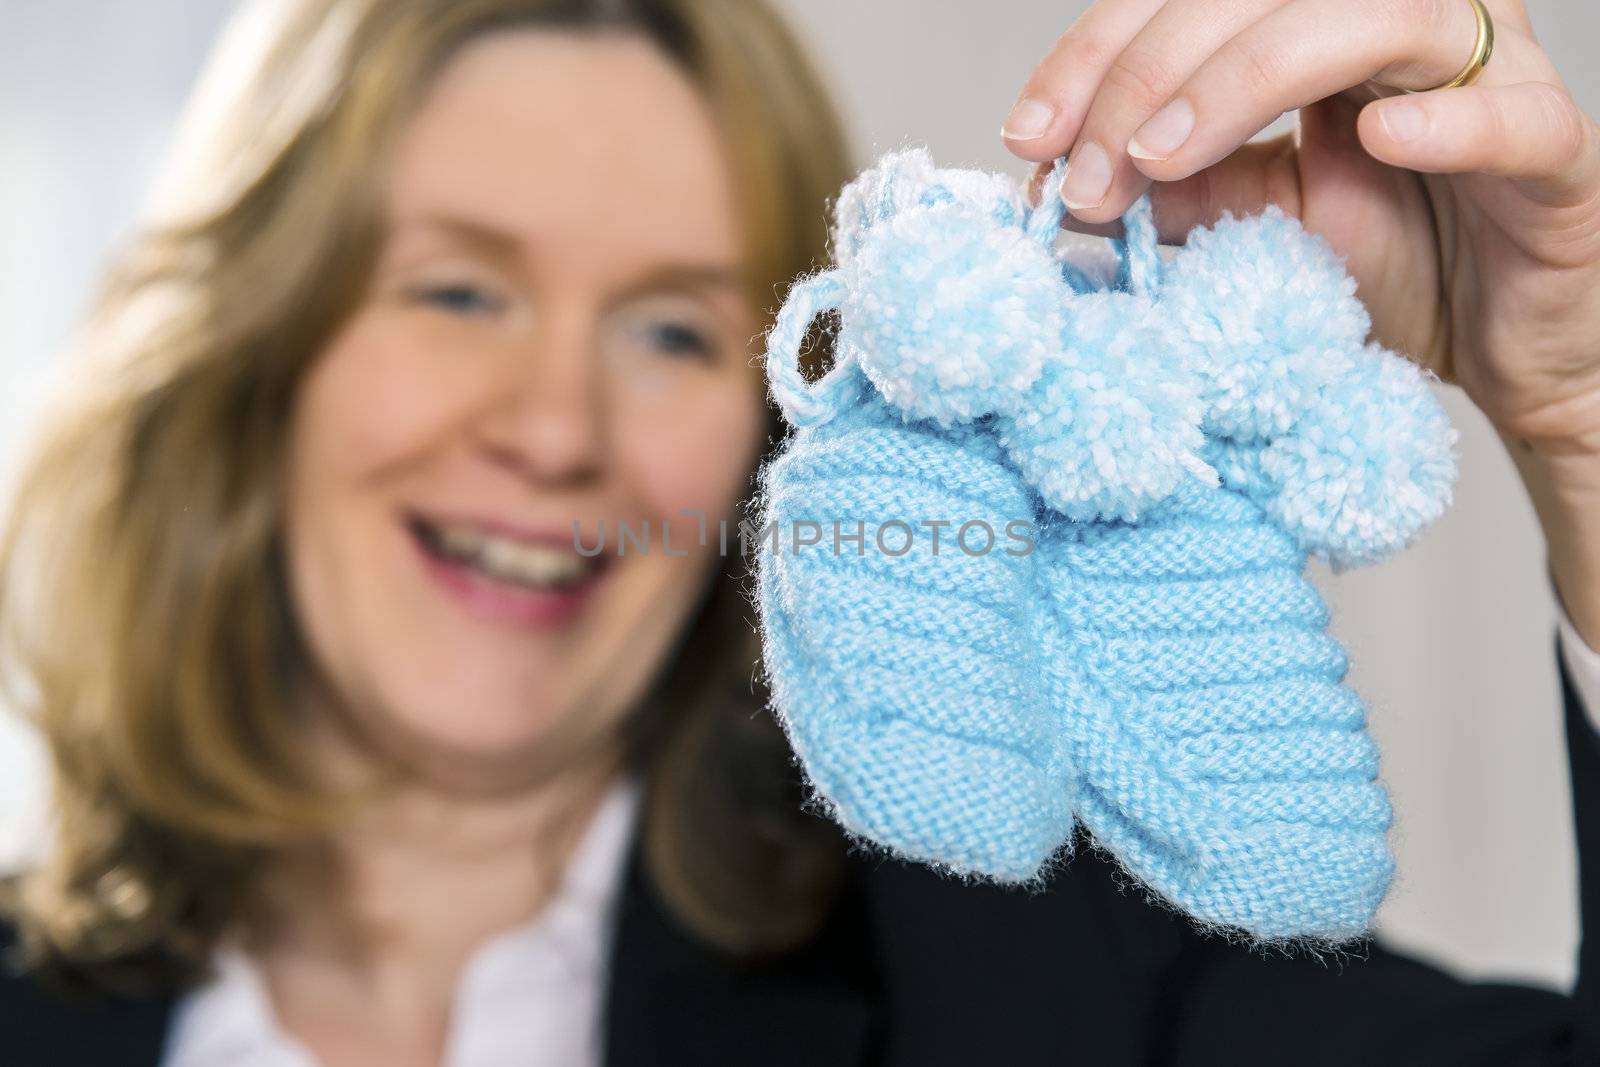 Blond woman with blue baby shoes by w20er